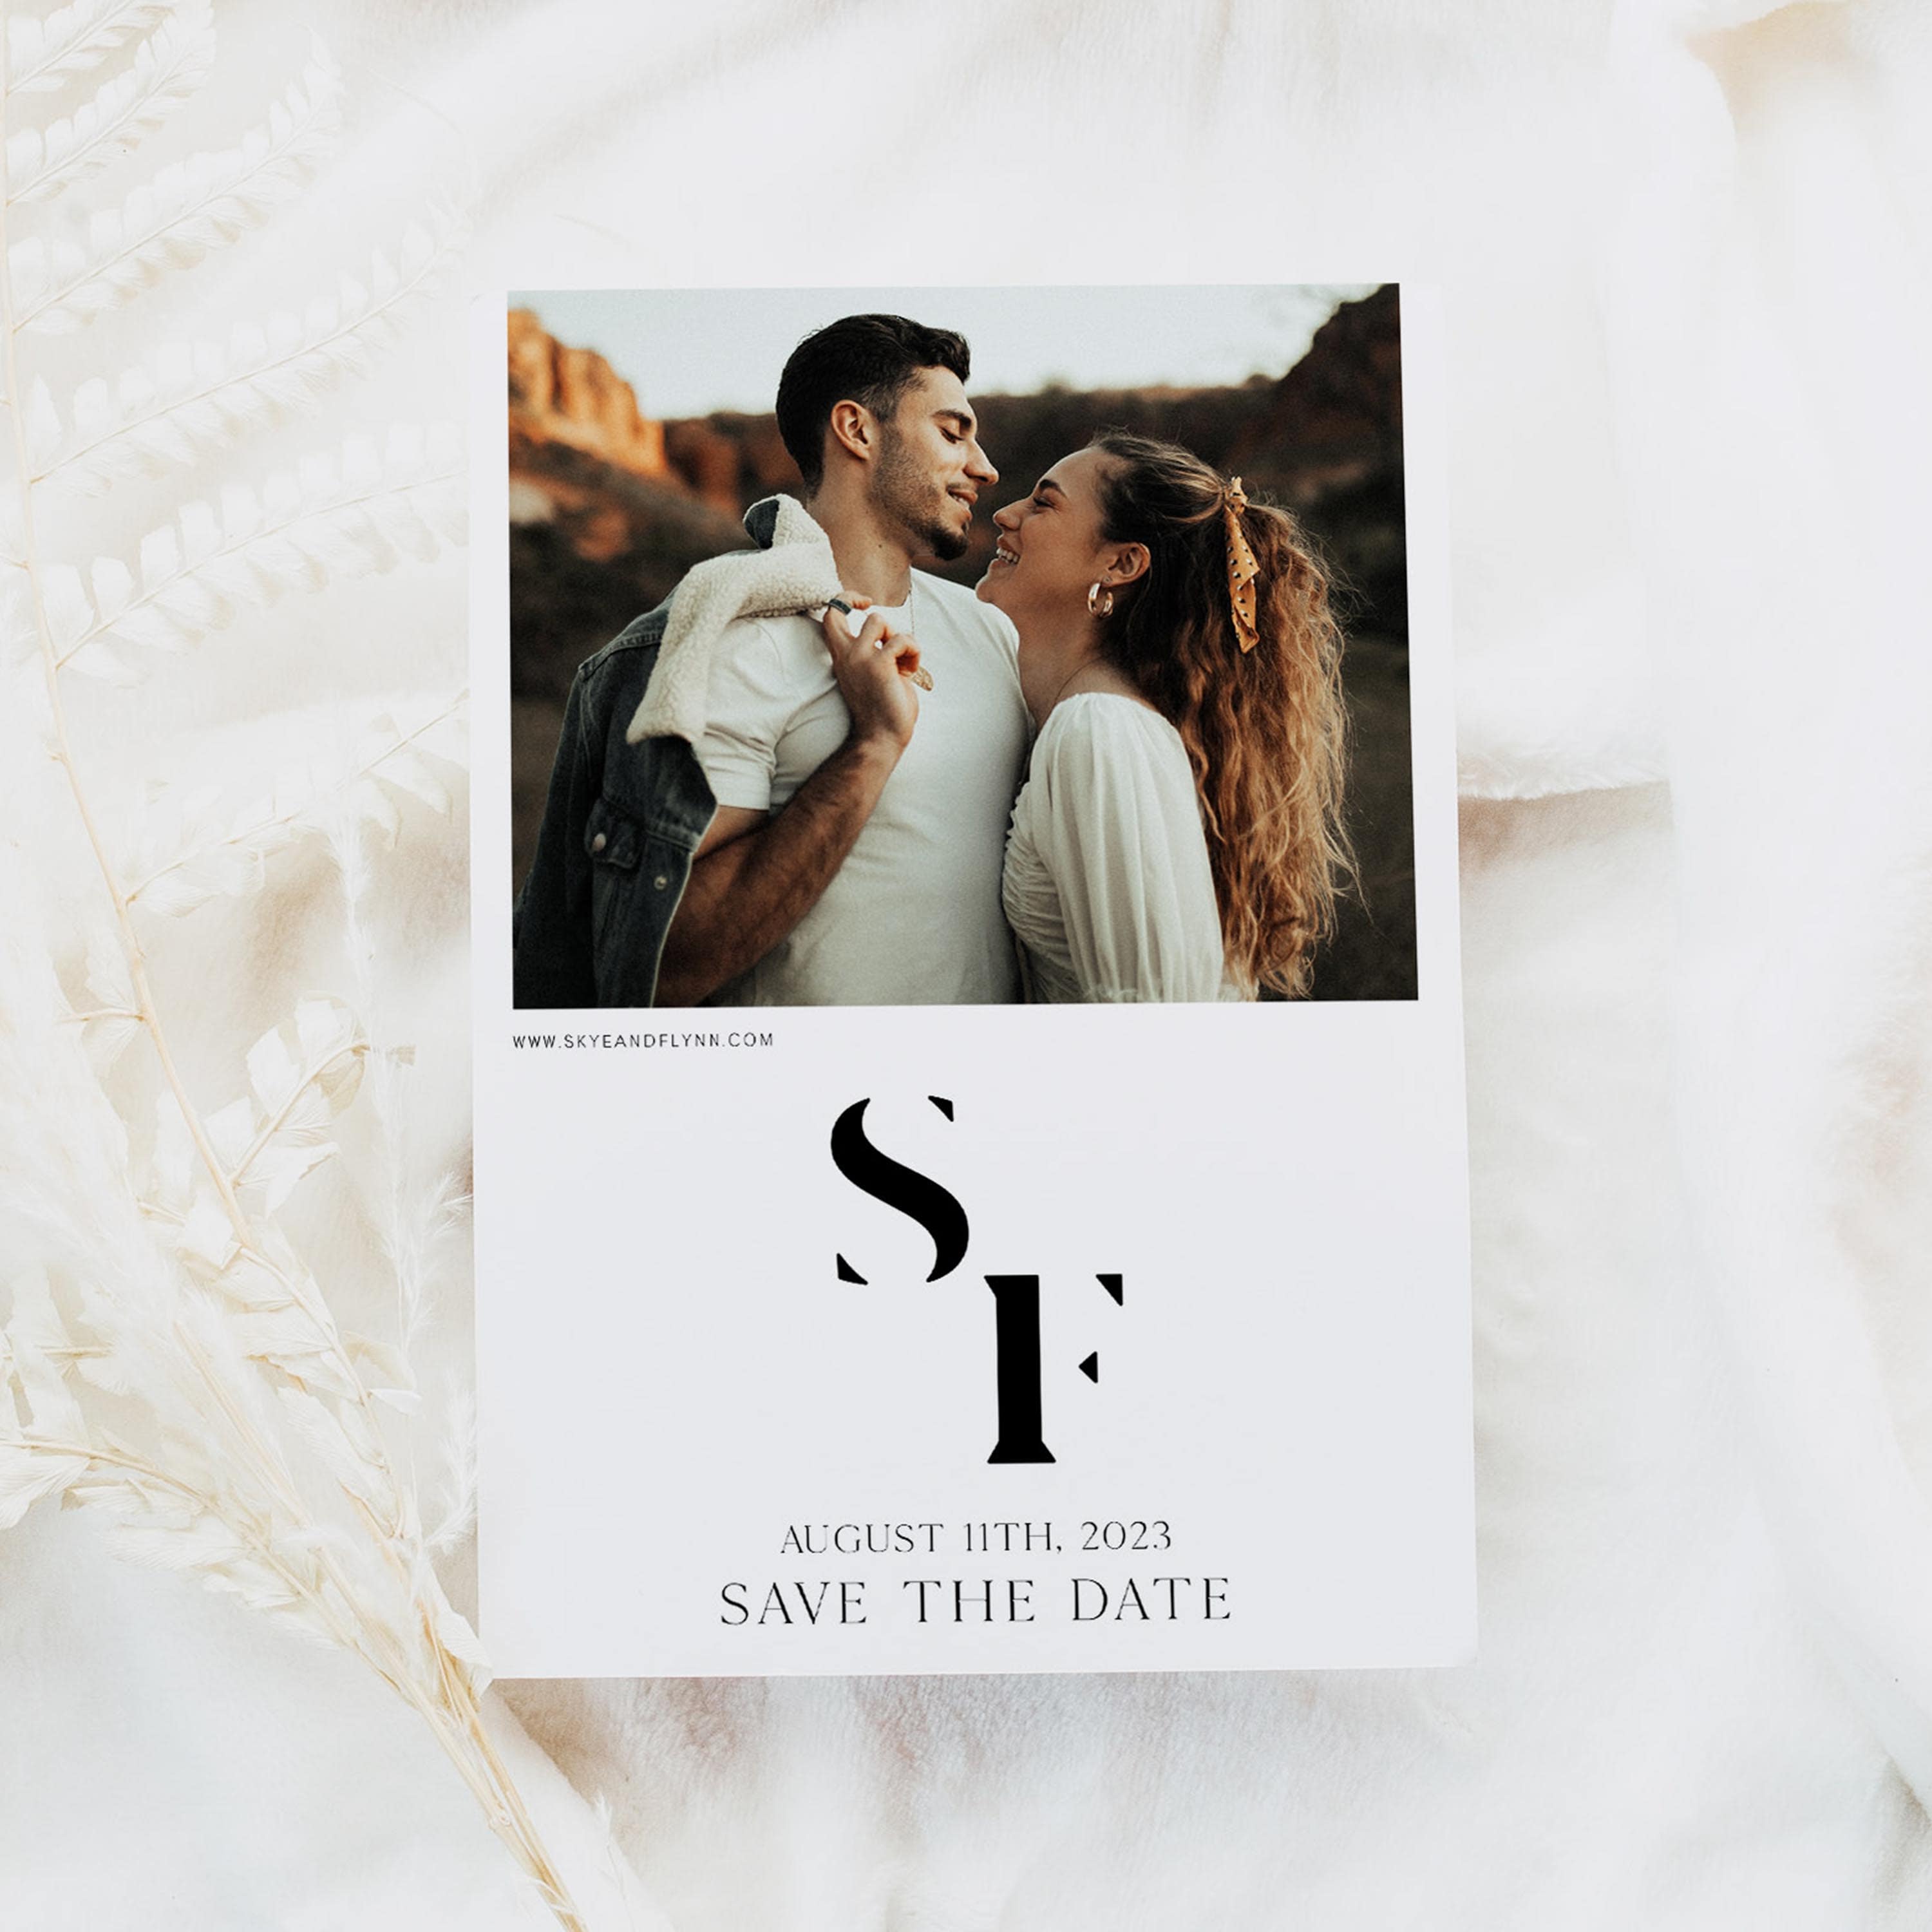 editable save the date invitation, printable save the date invitation, editable wedding invitation suite, editable wedding stationery, printable wedding stationery, modern wedding items, wedding save the dates